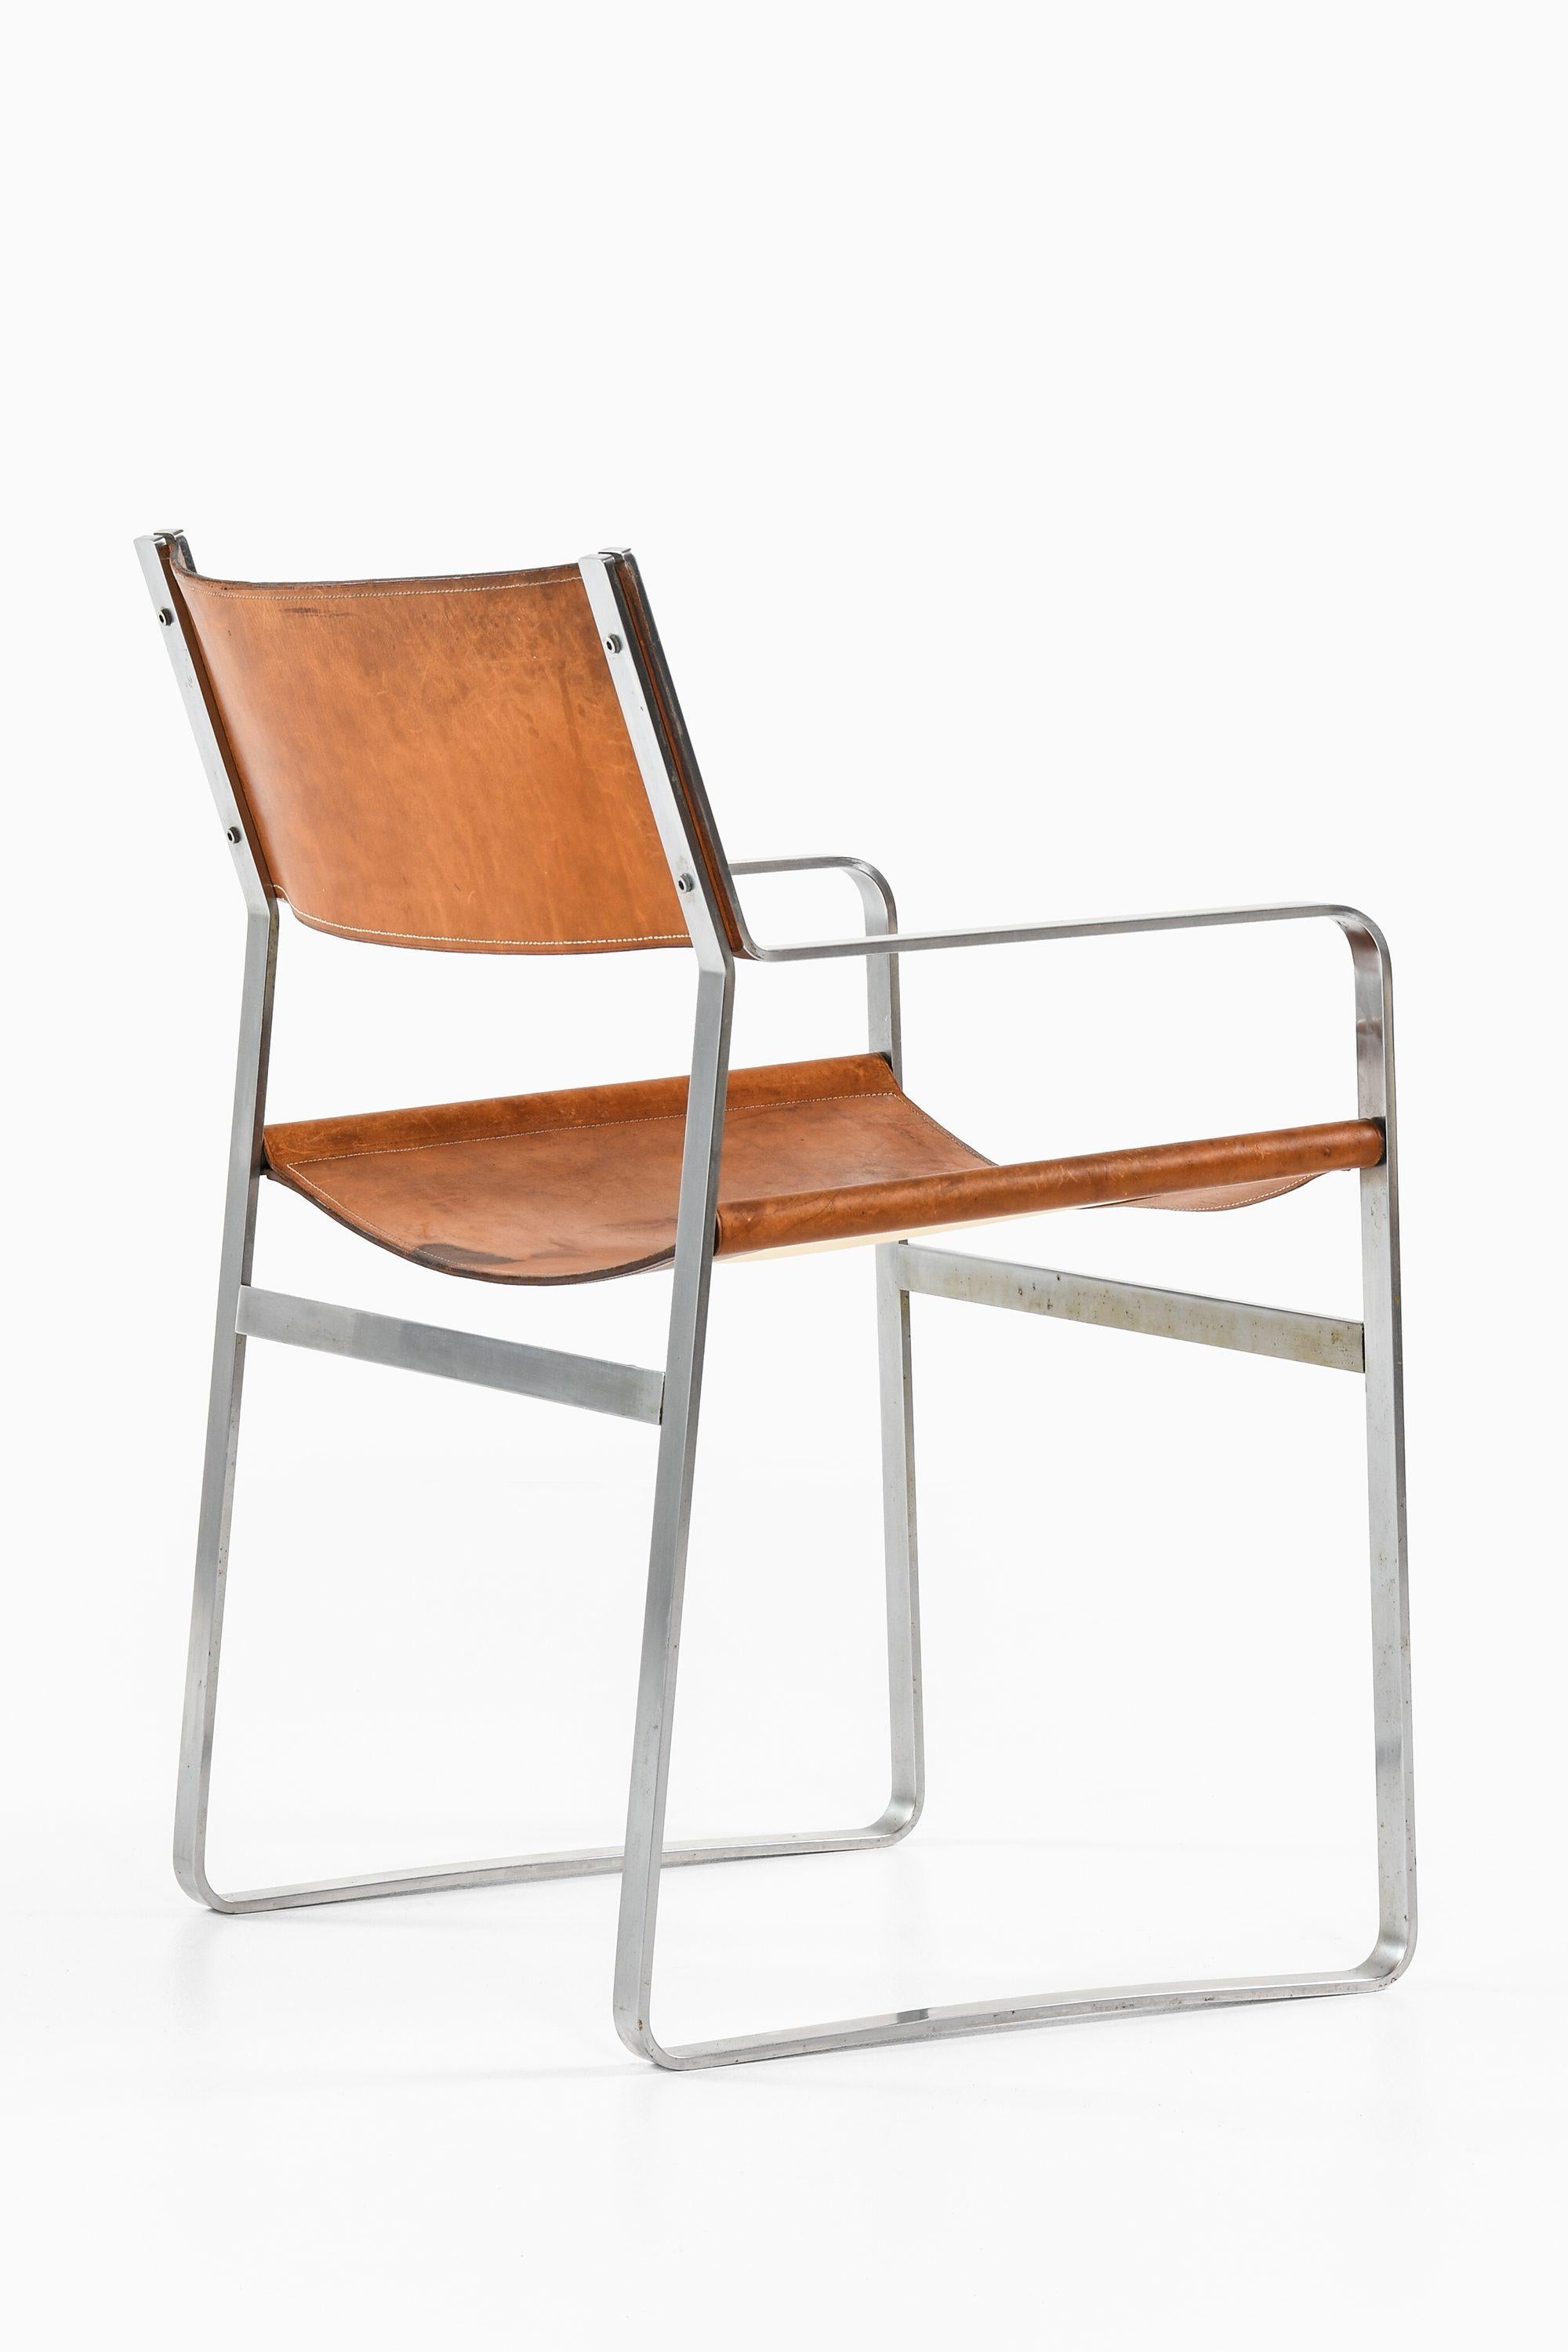 Danish Armchair in Steel and Original Leather by Hans Wegner, 1970s For Sale